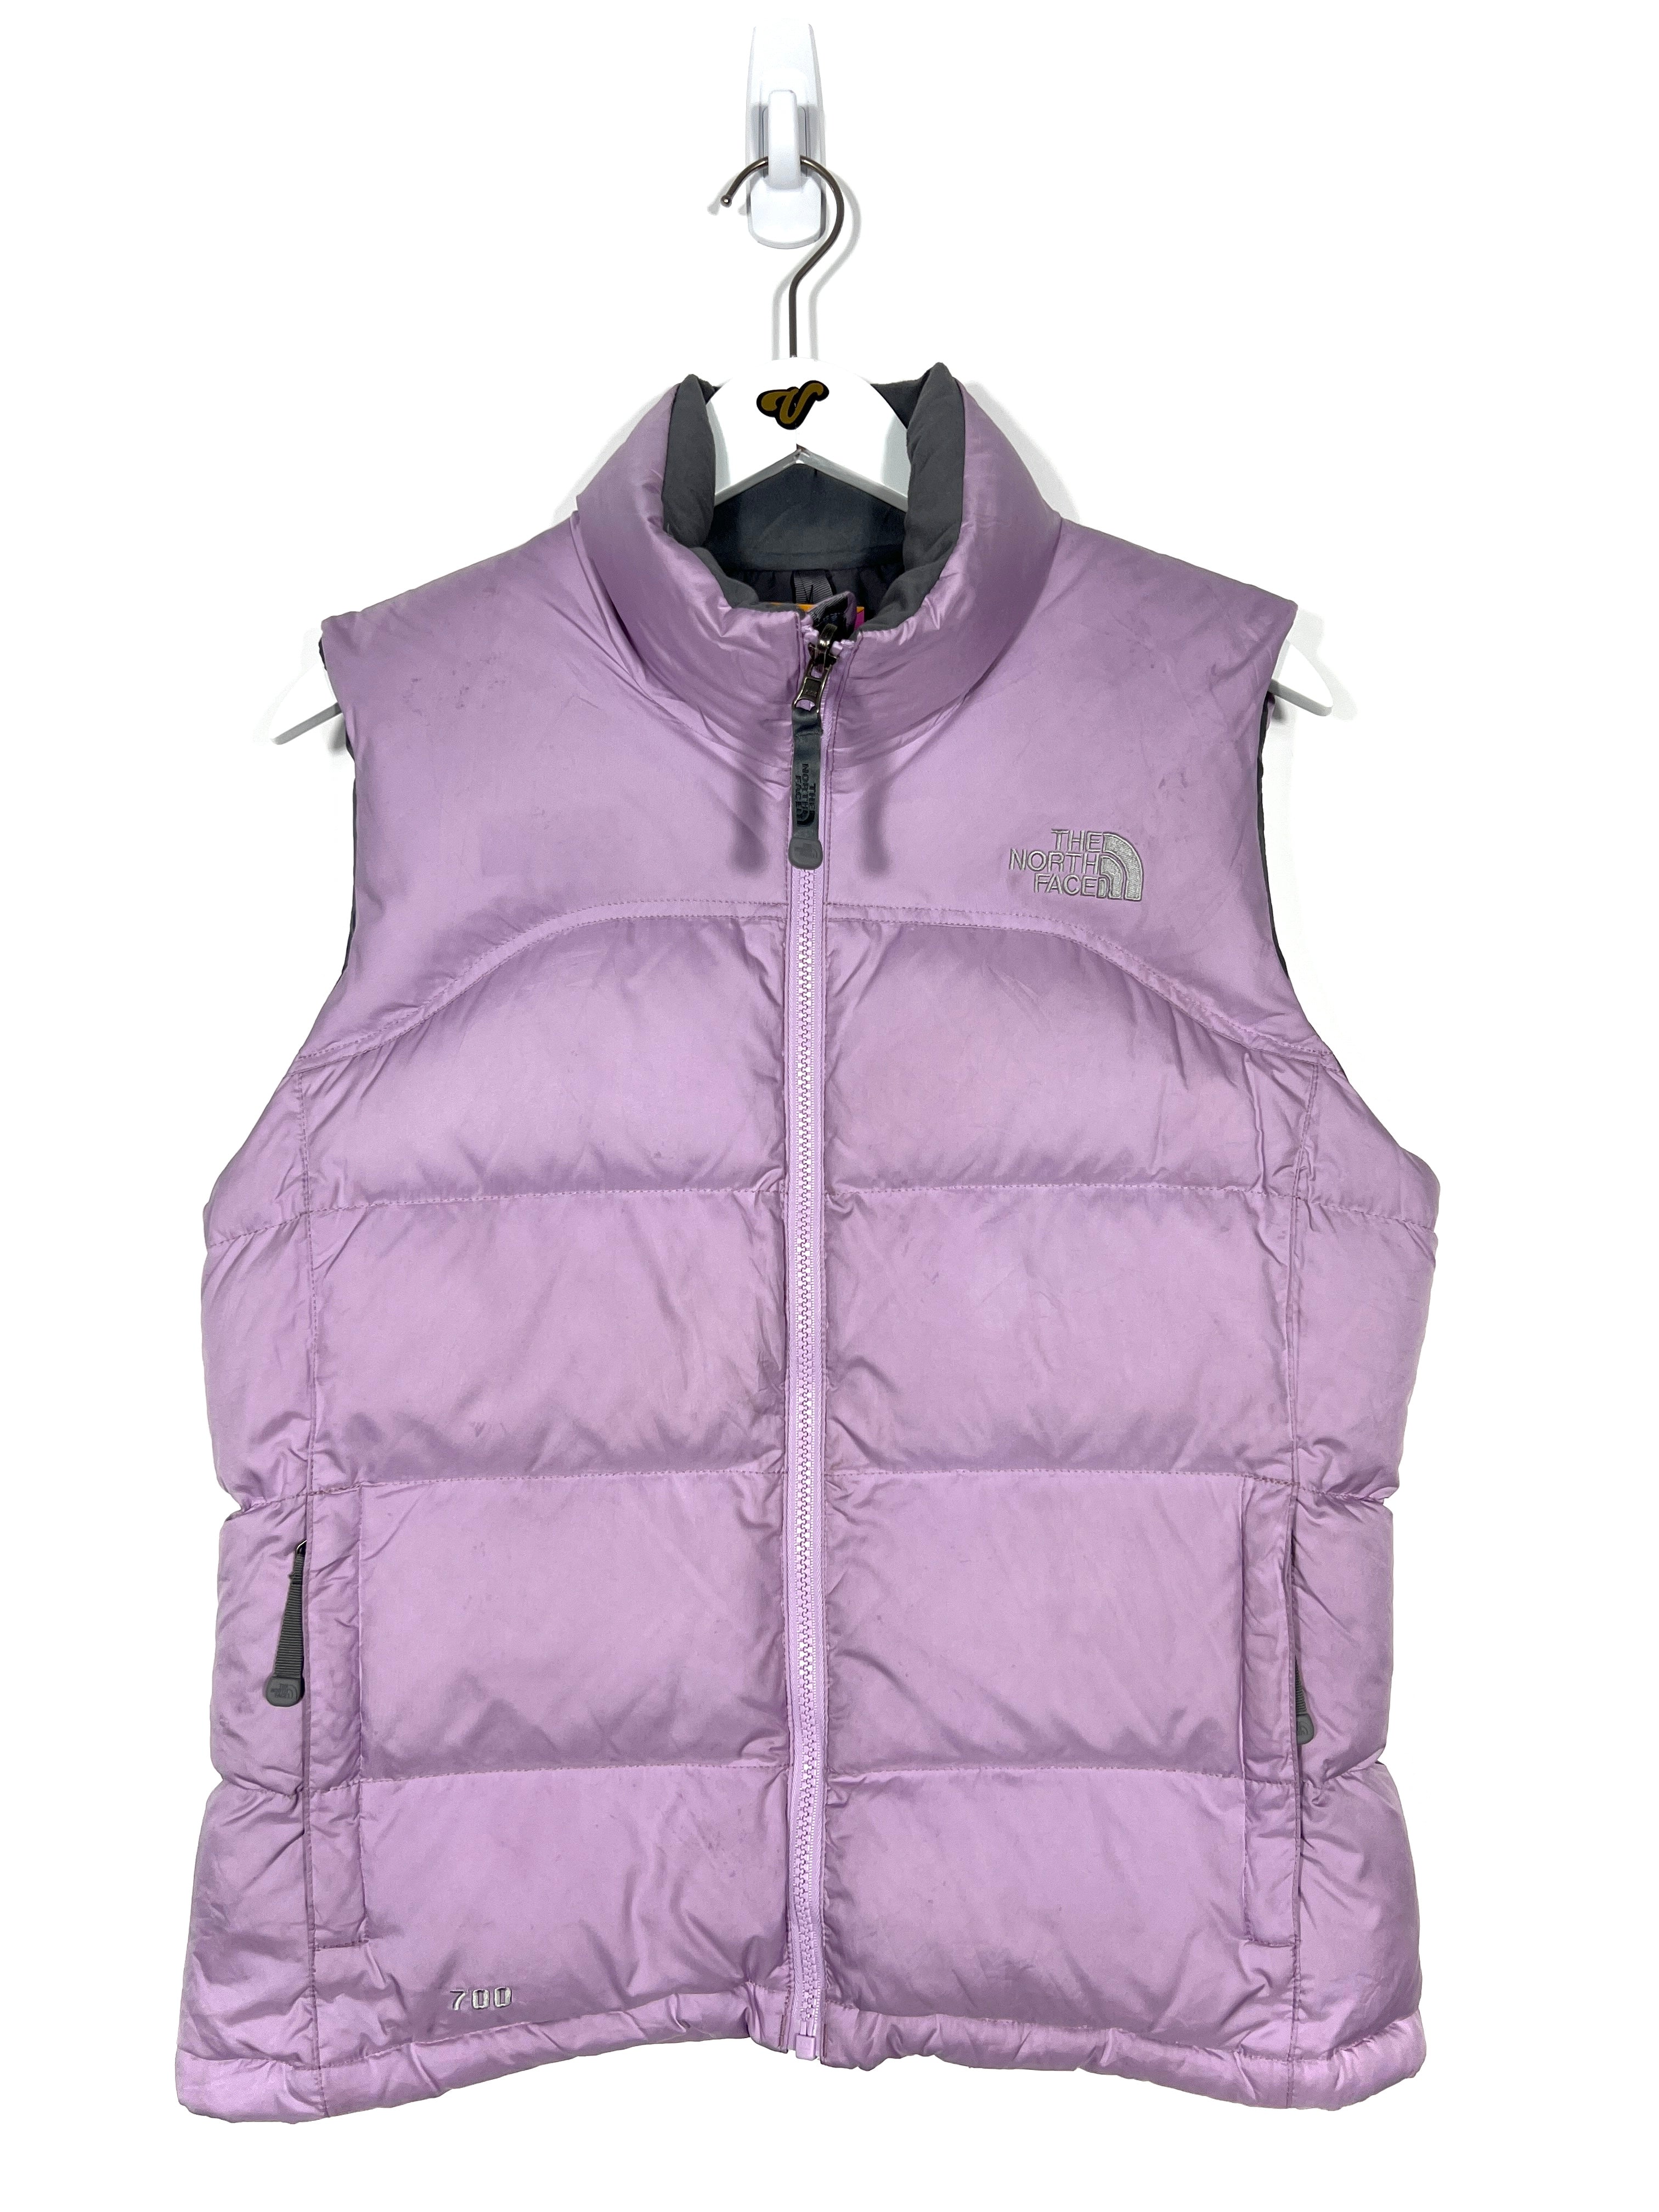 Vintage The North Face 700 Series Nuptse Puffer Vest - Women's Small